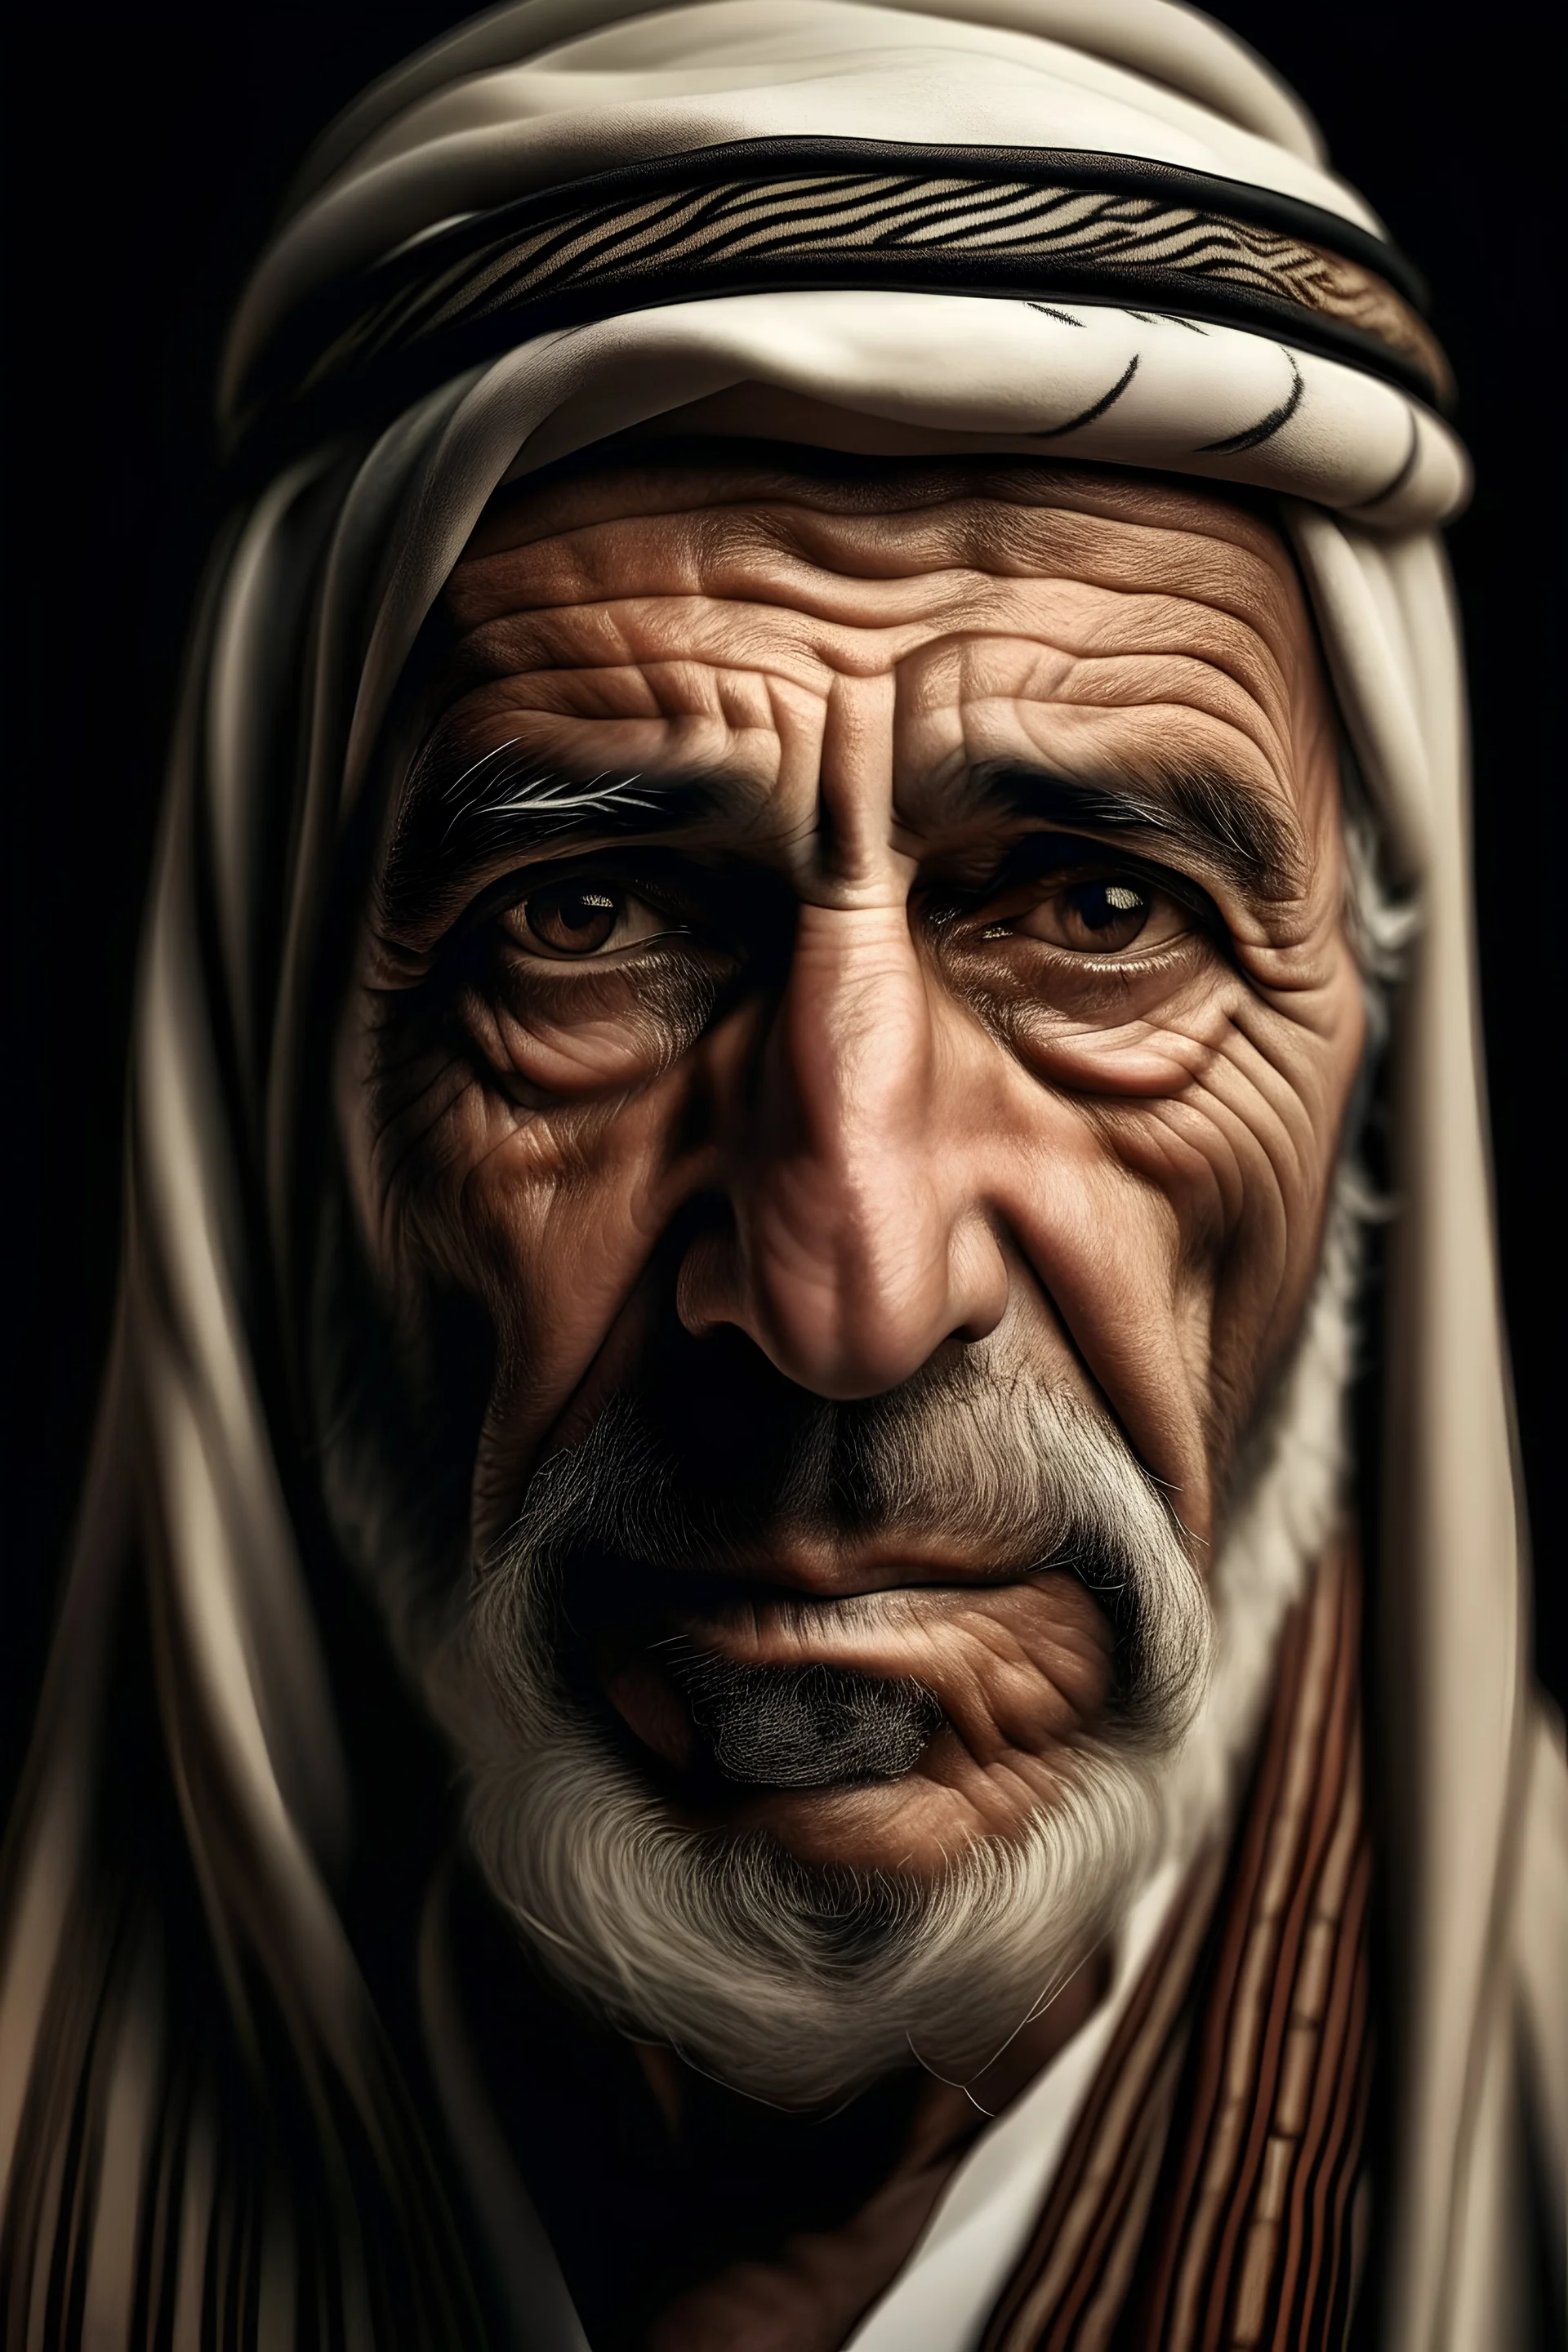 old Arab portrait in artistic way. With worry expression. Front view. With his traditional Arabic costum.